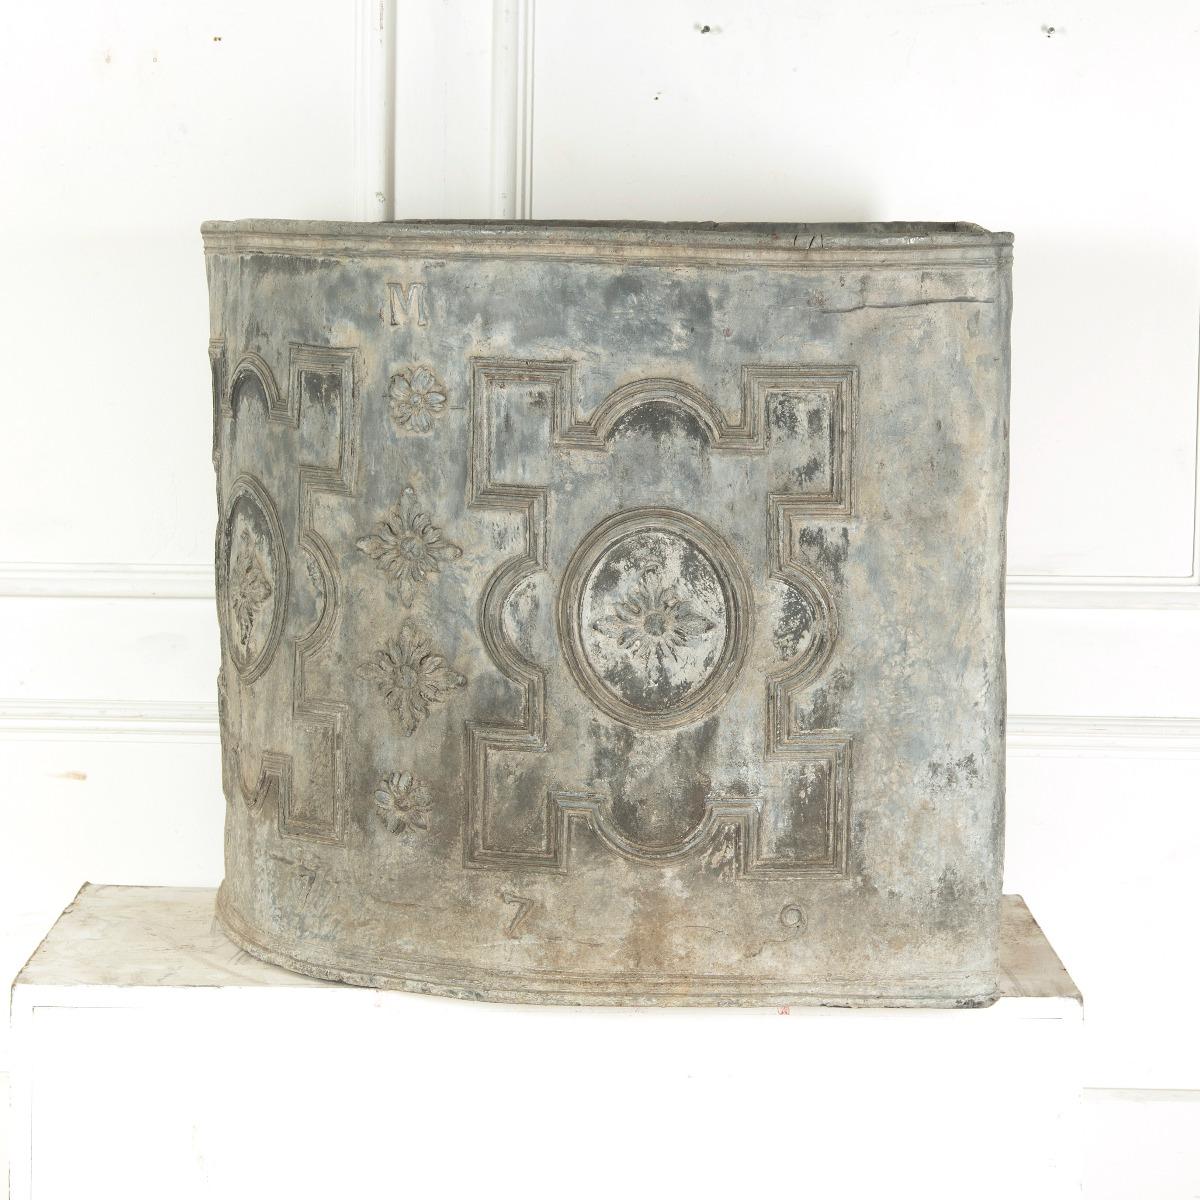 George III corner lead cistern, initialled M and dated 1779.

Cisterns were widely produced in 17th and 18th Century Britain and were used for storing rainwater, to be used in the home and the garden. Both decorative and practical, they were a